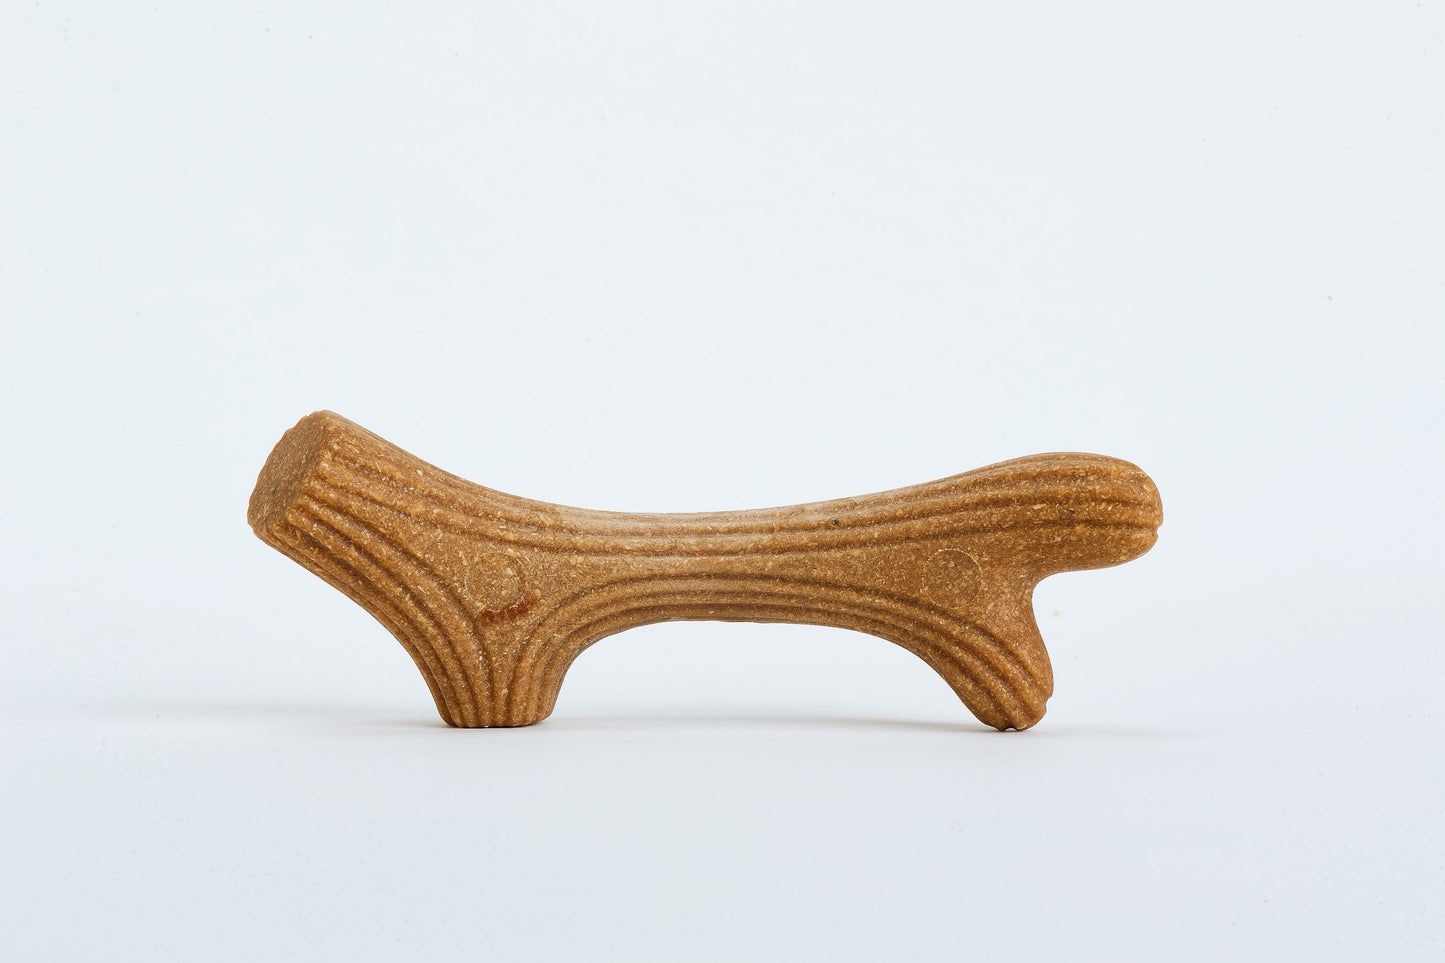 Pine Wood Dust Dental Chew Toy - Lucid and Real